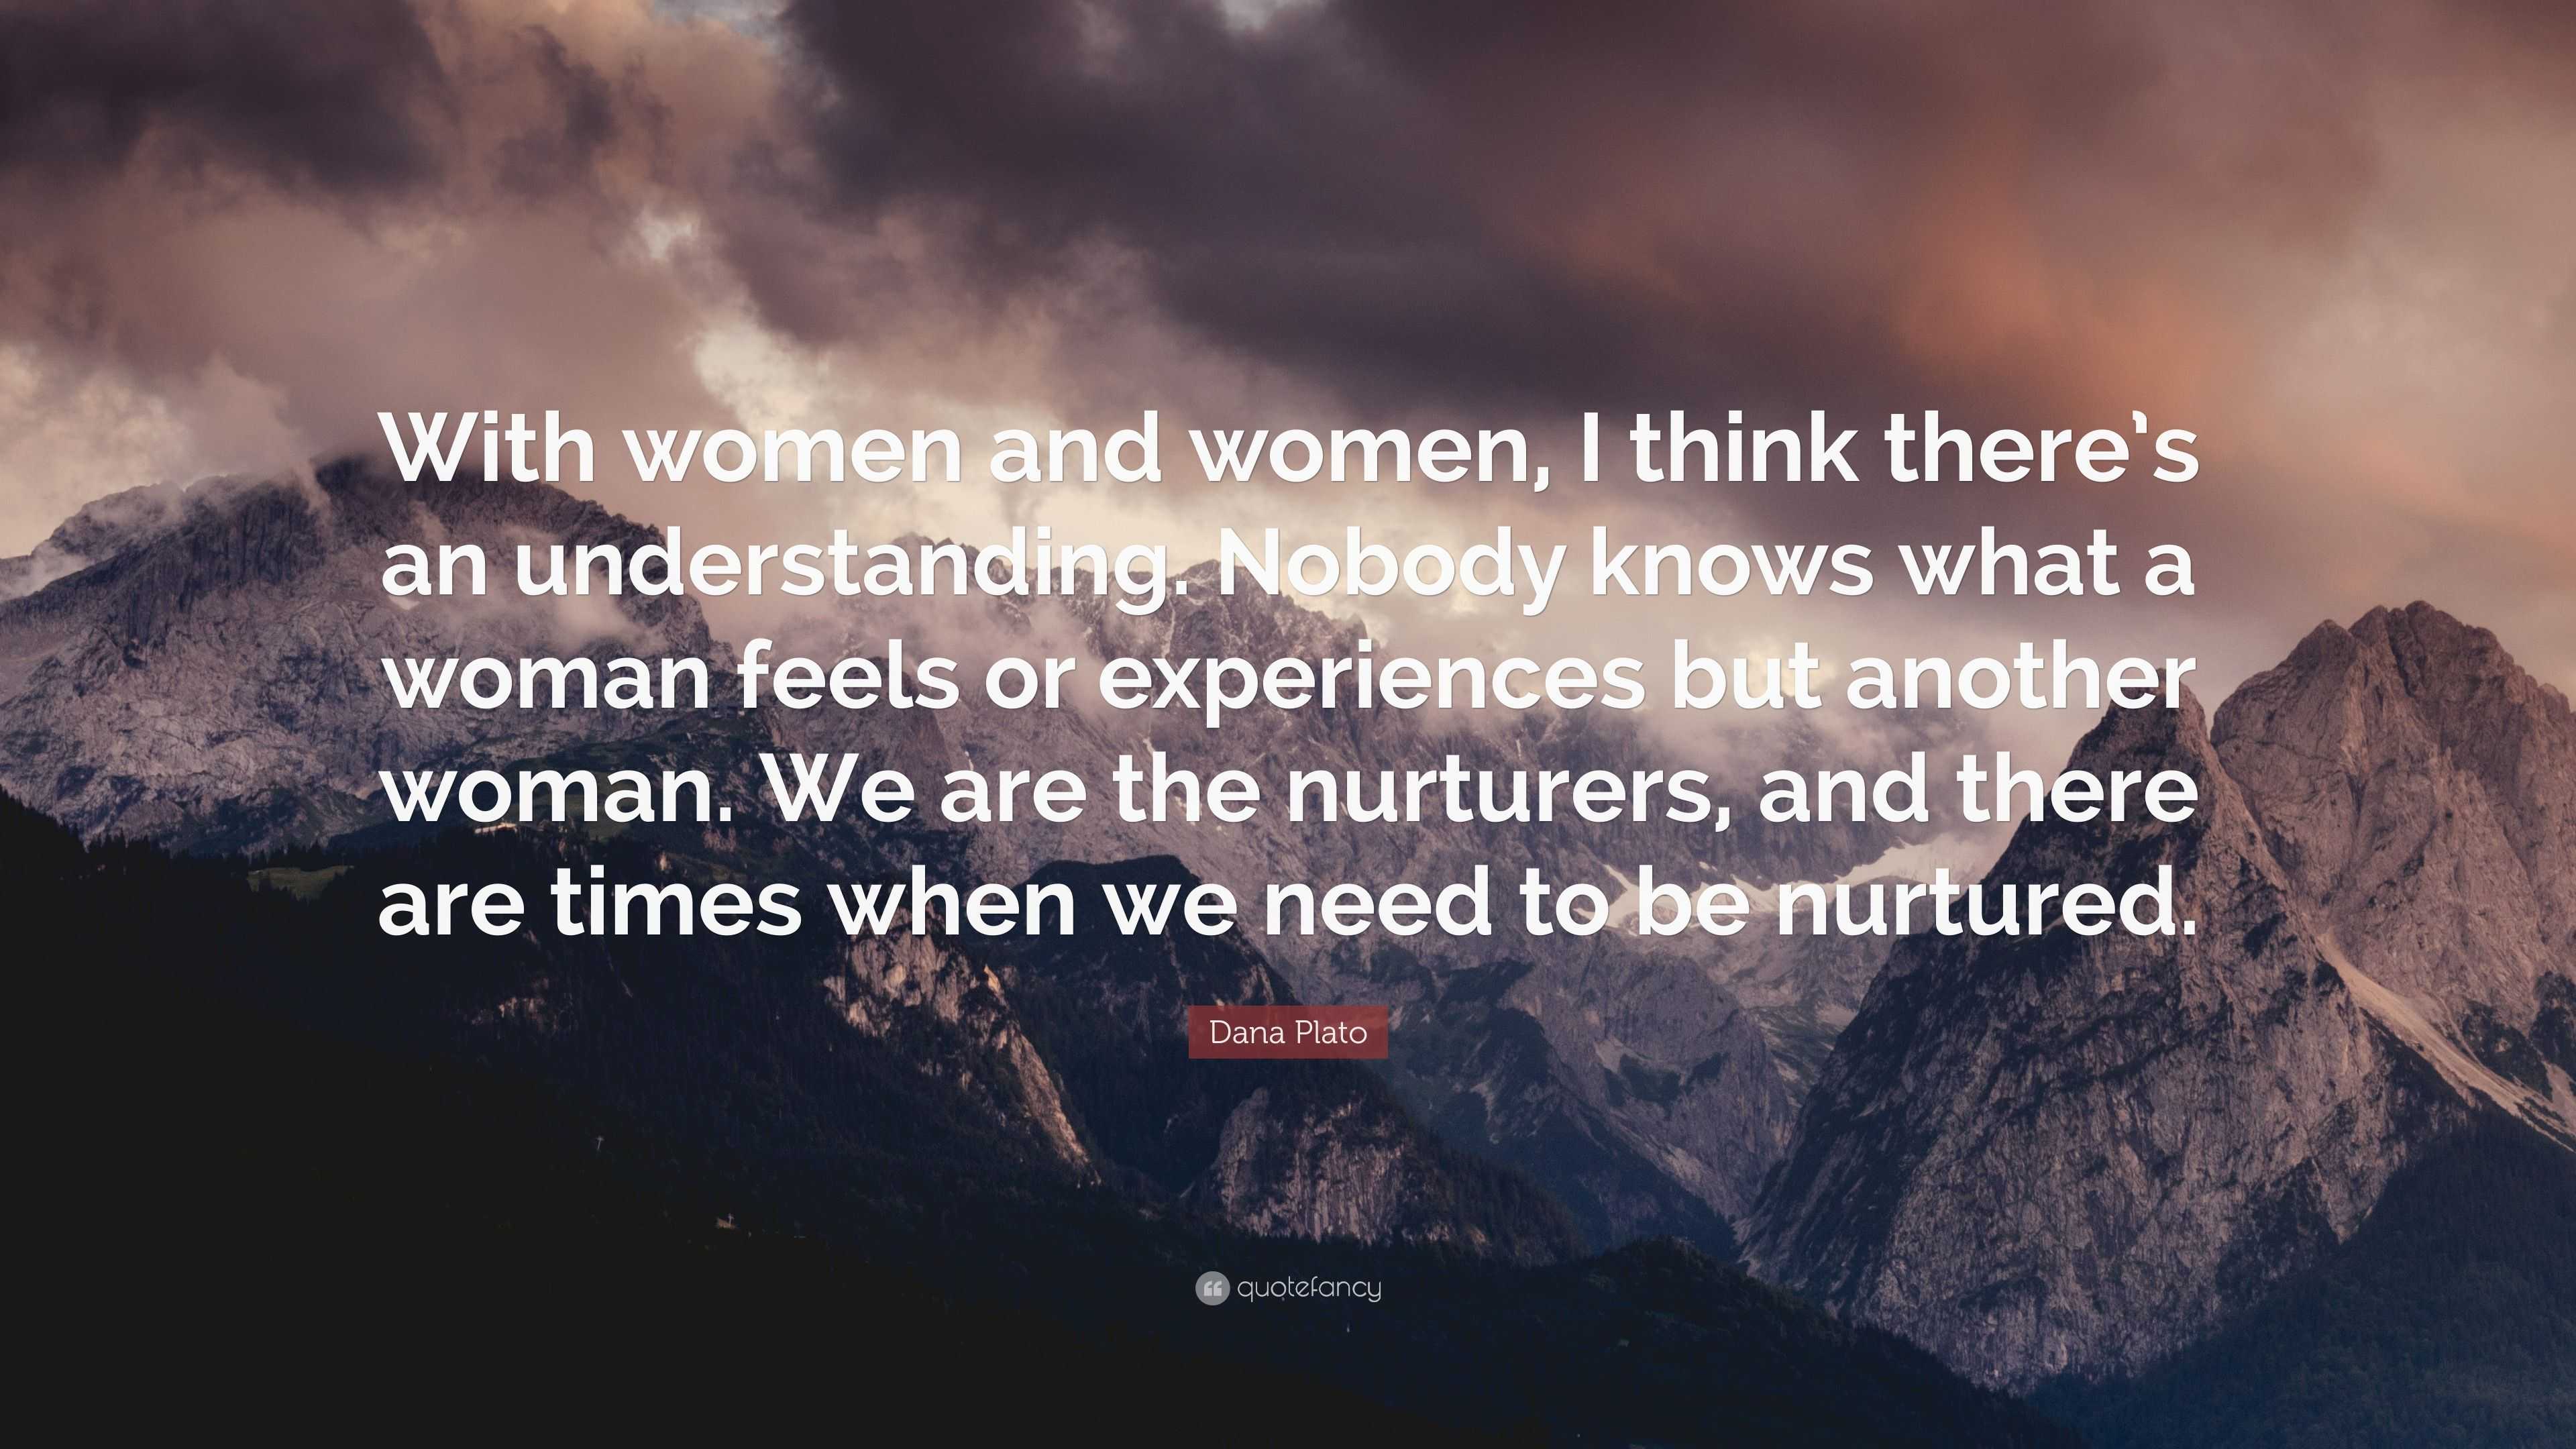 Dana Plato Quote: “With women and women, I think there’s an ...